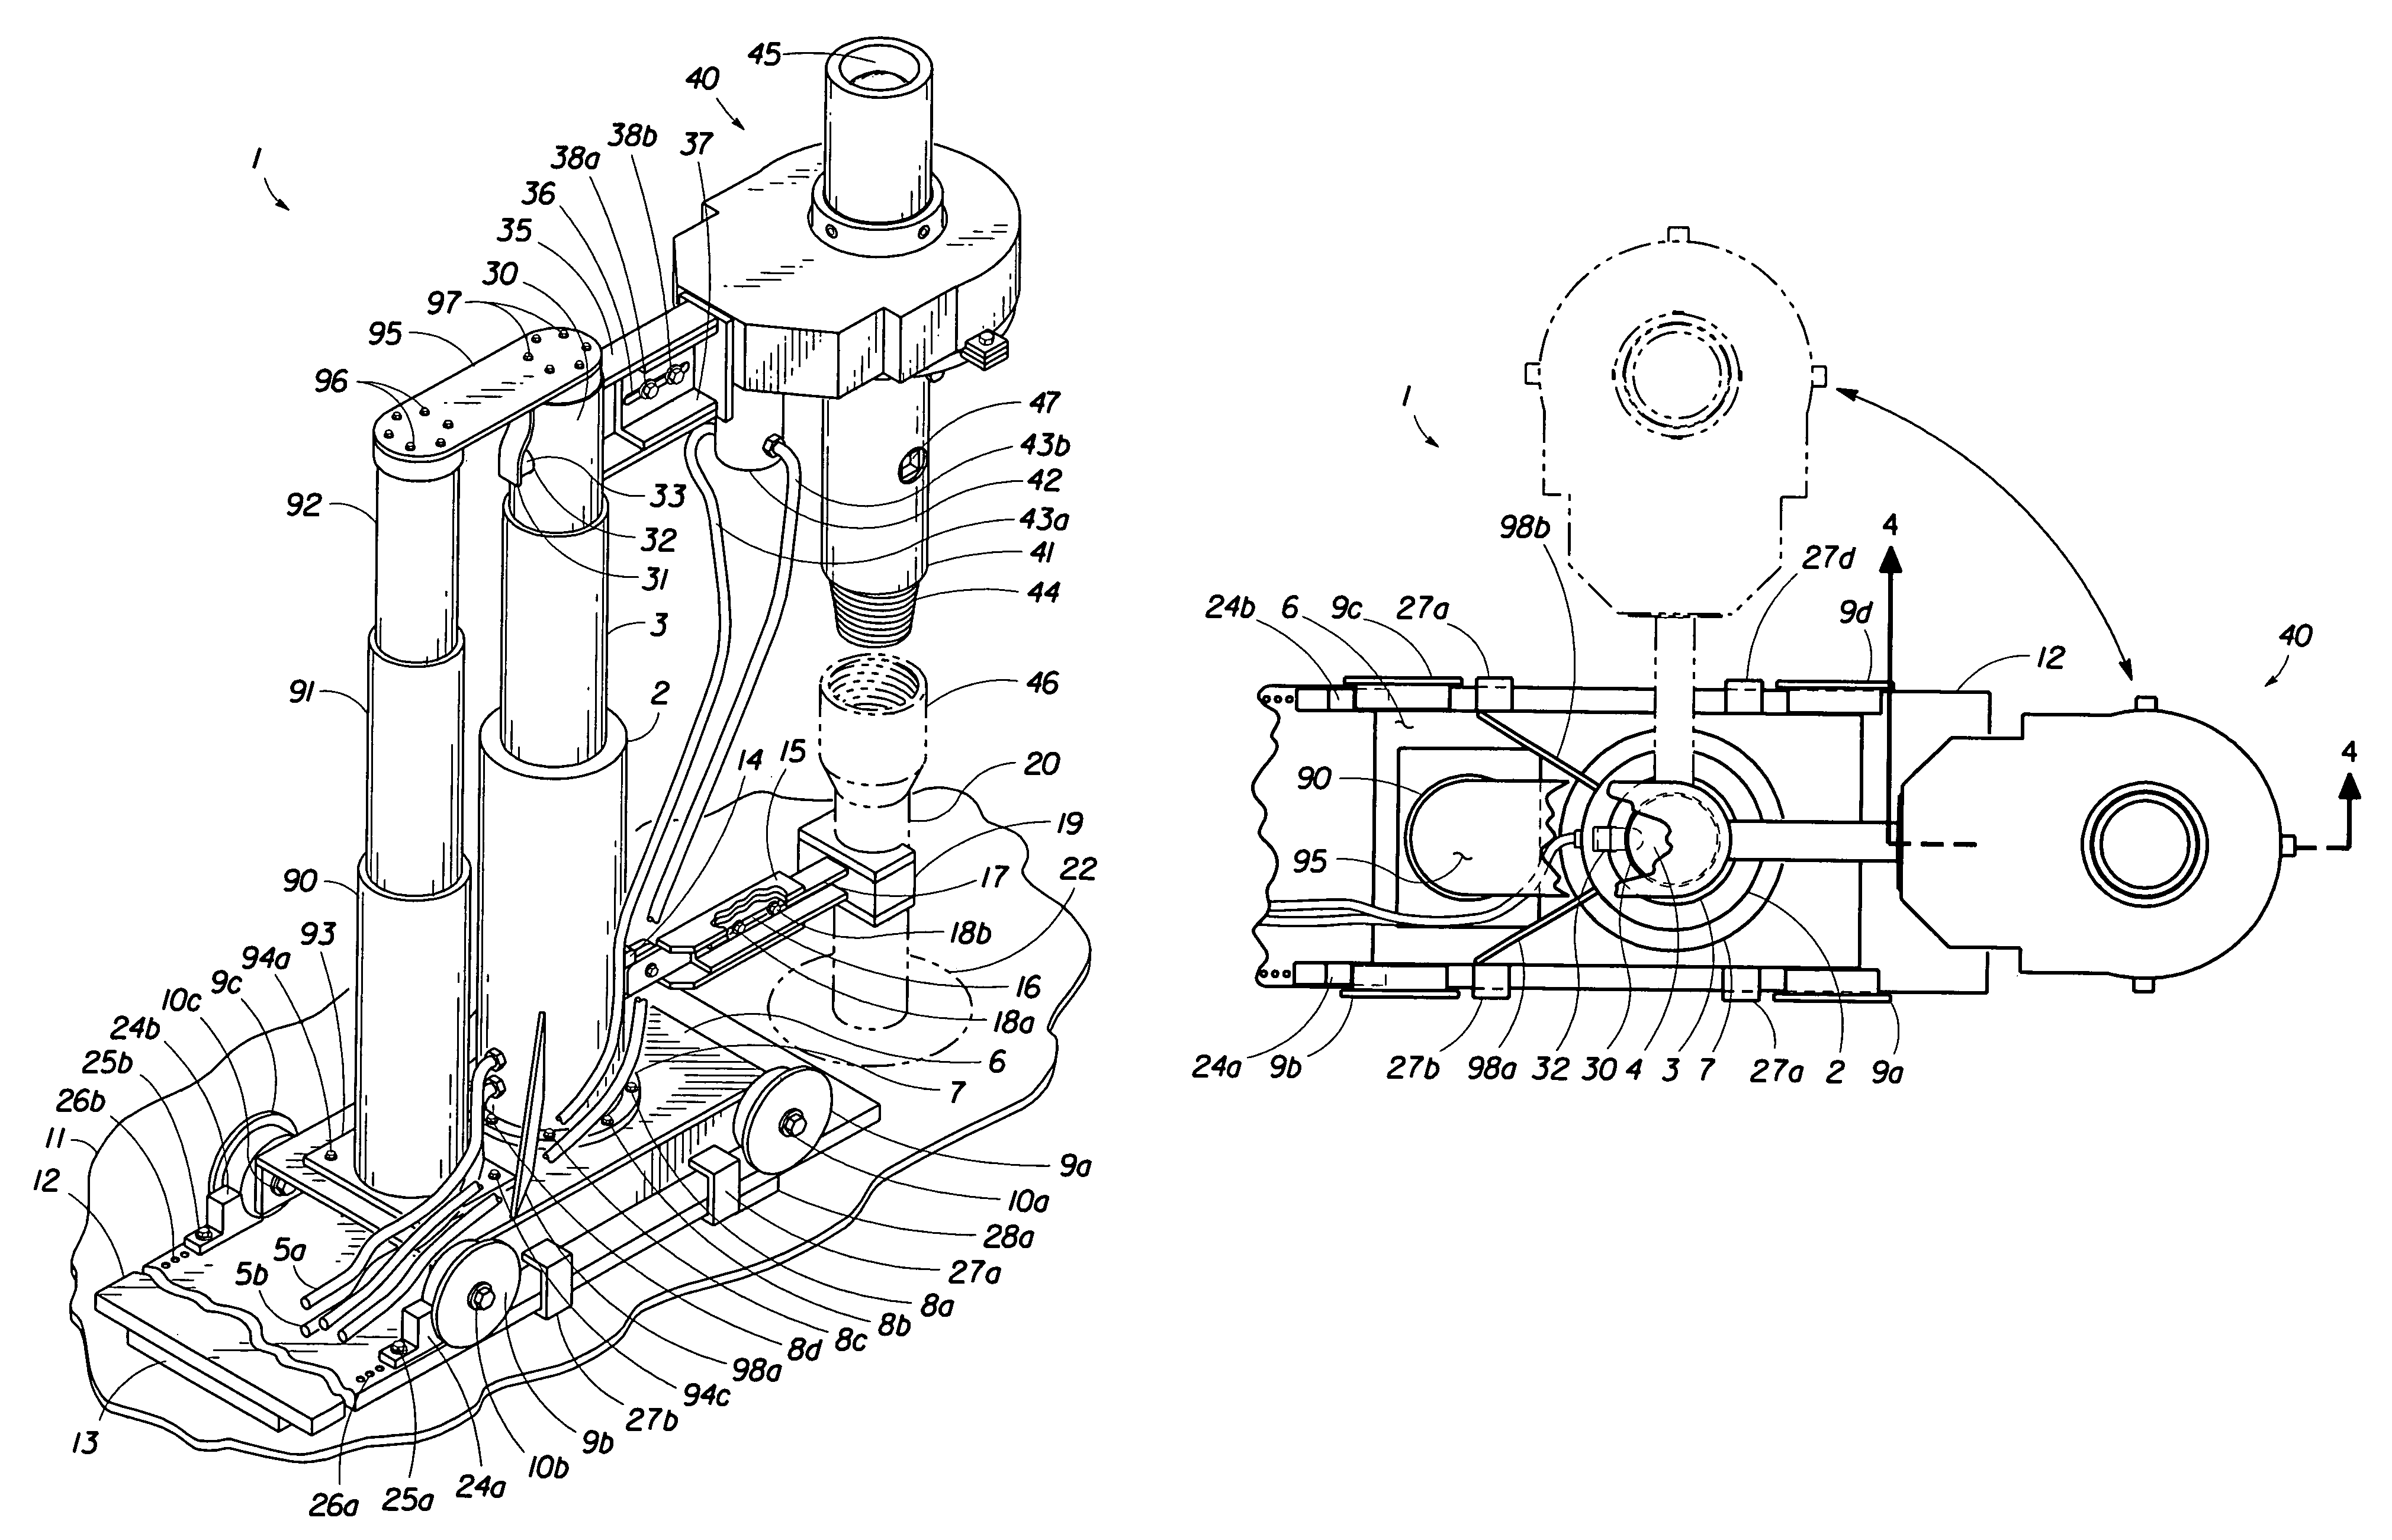 Hydraulic flow control system with an internal compensator sleeve